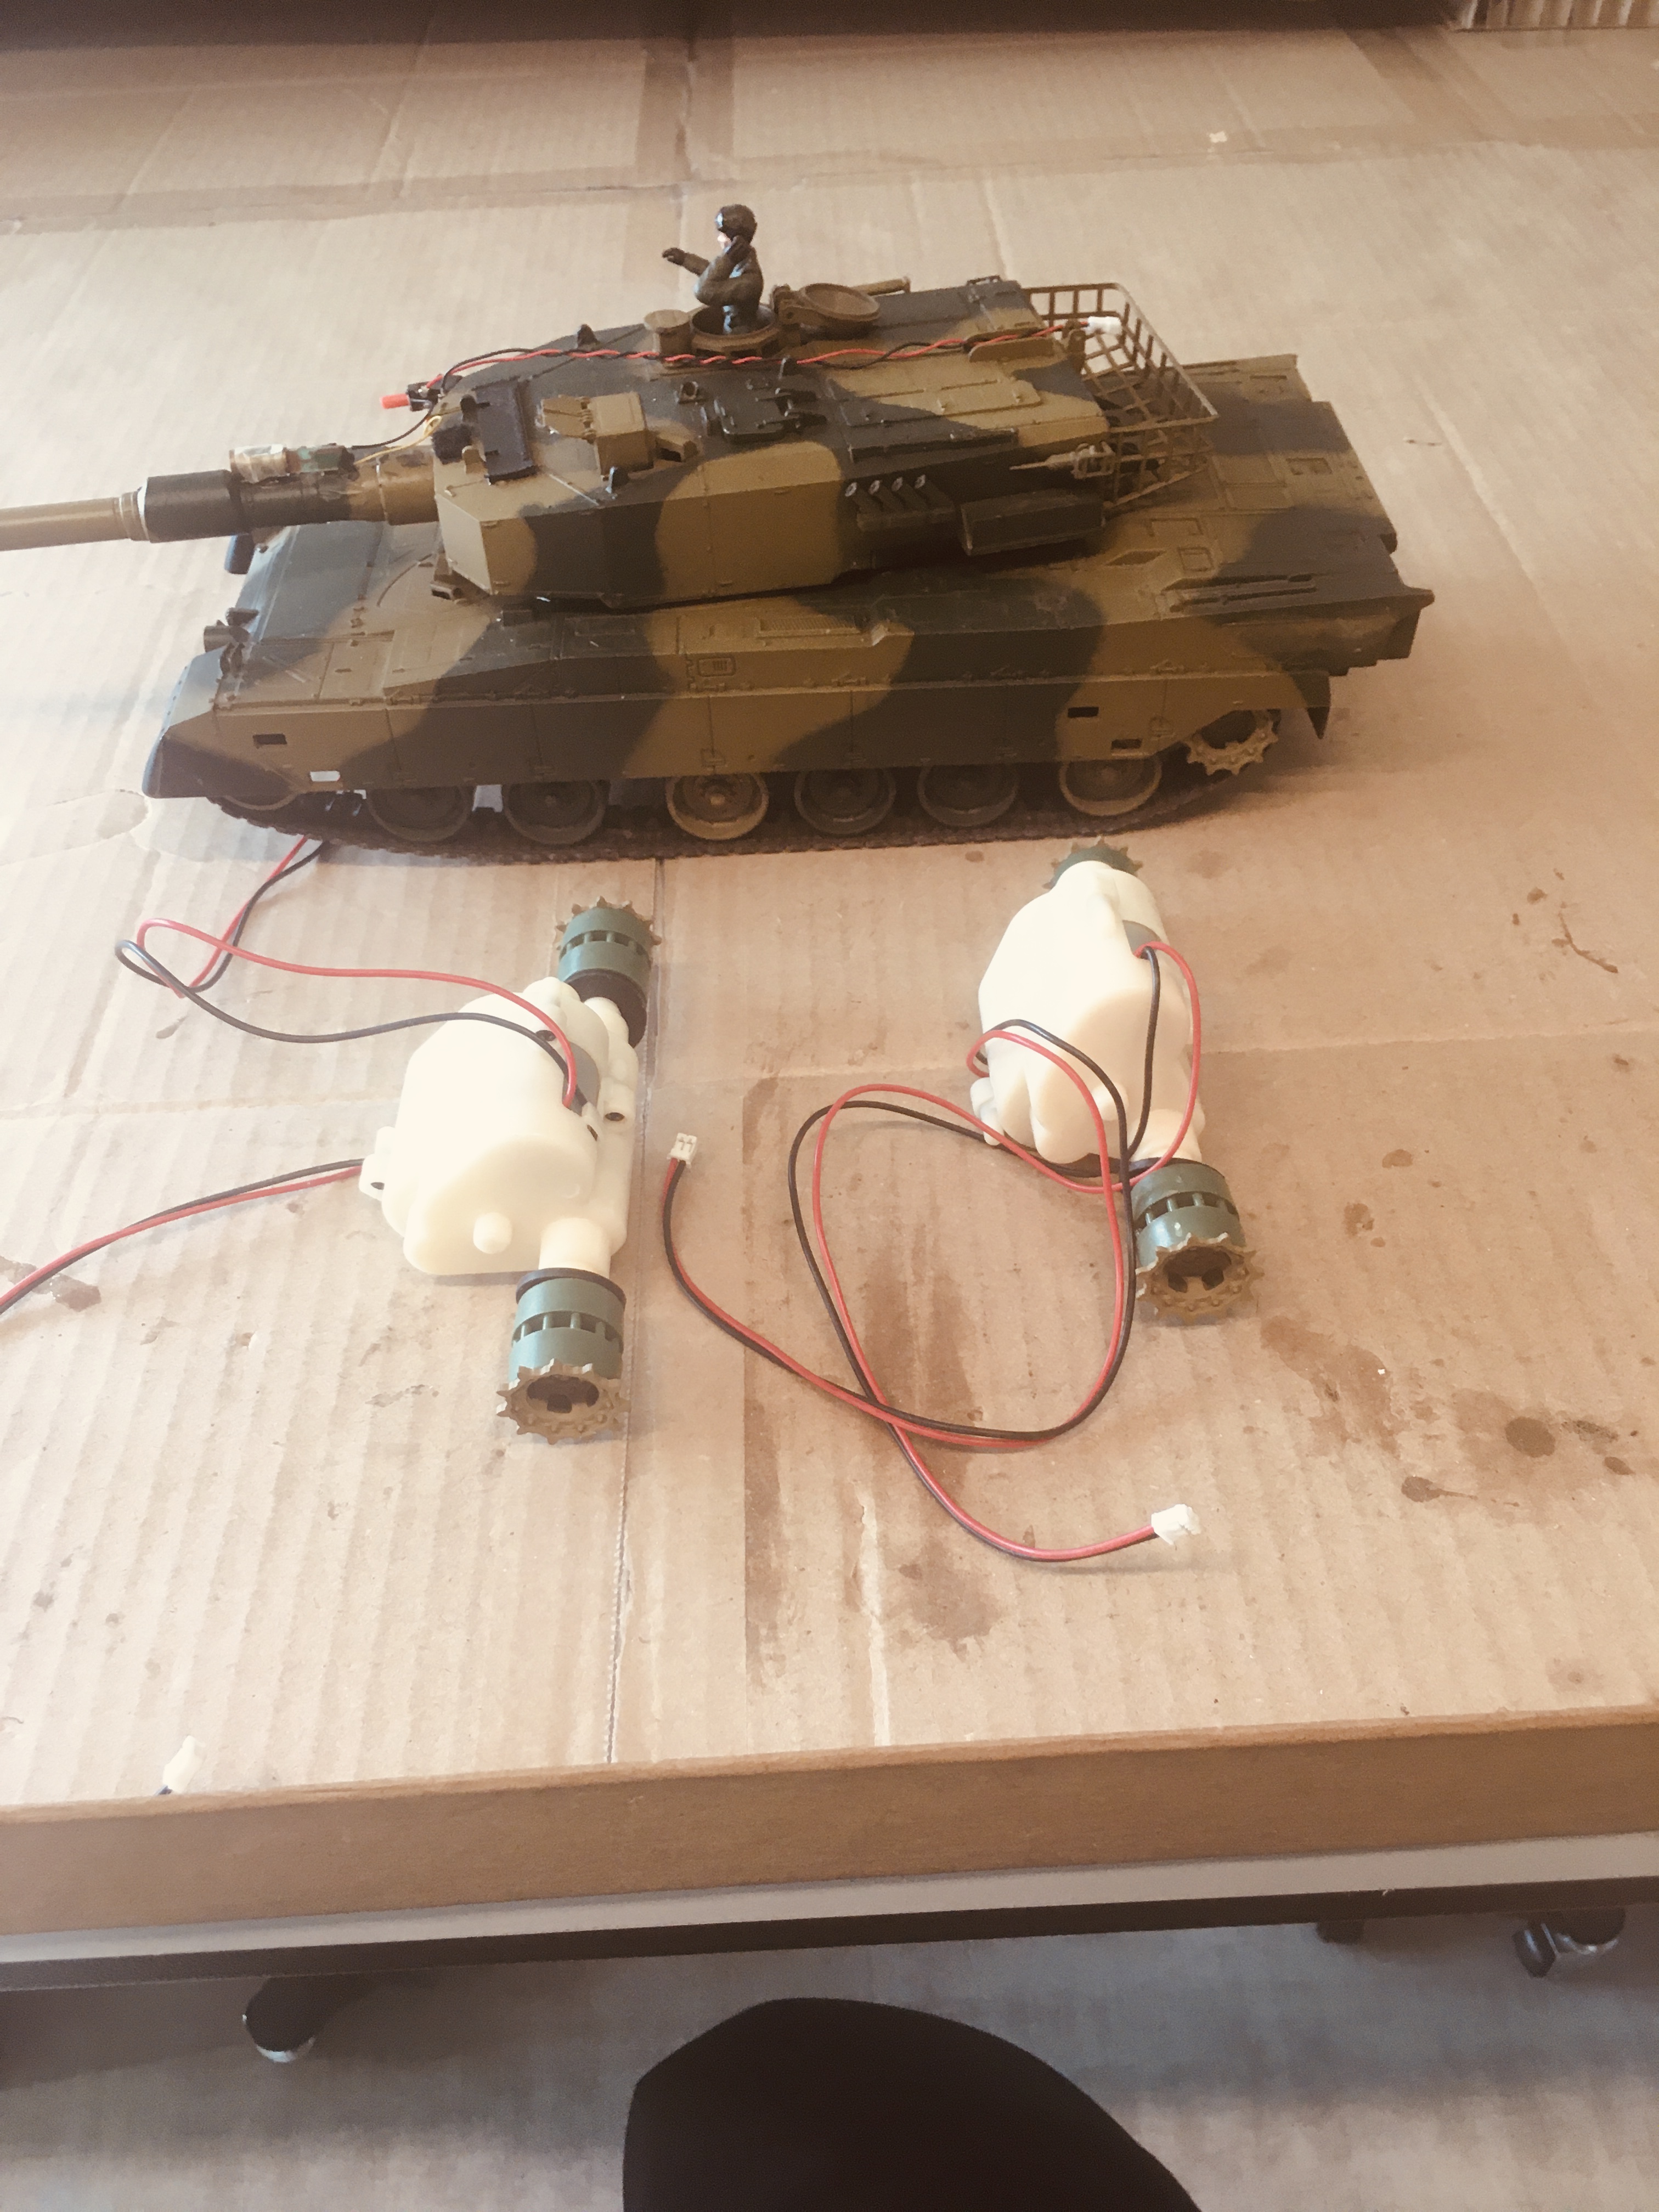 This 1/24 HL Type 90 has a stripped gear and will get a new motor drive unit with the mod.